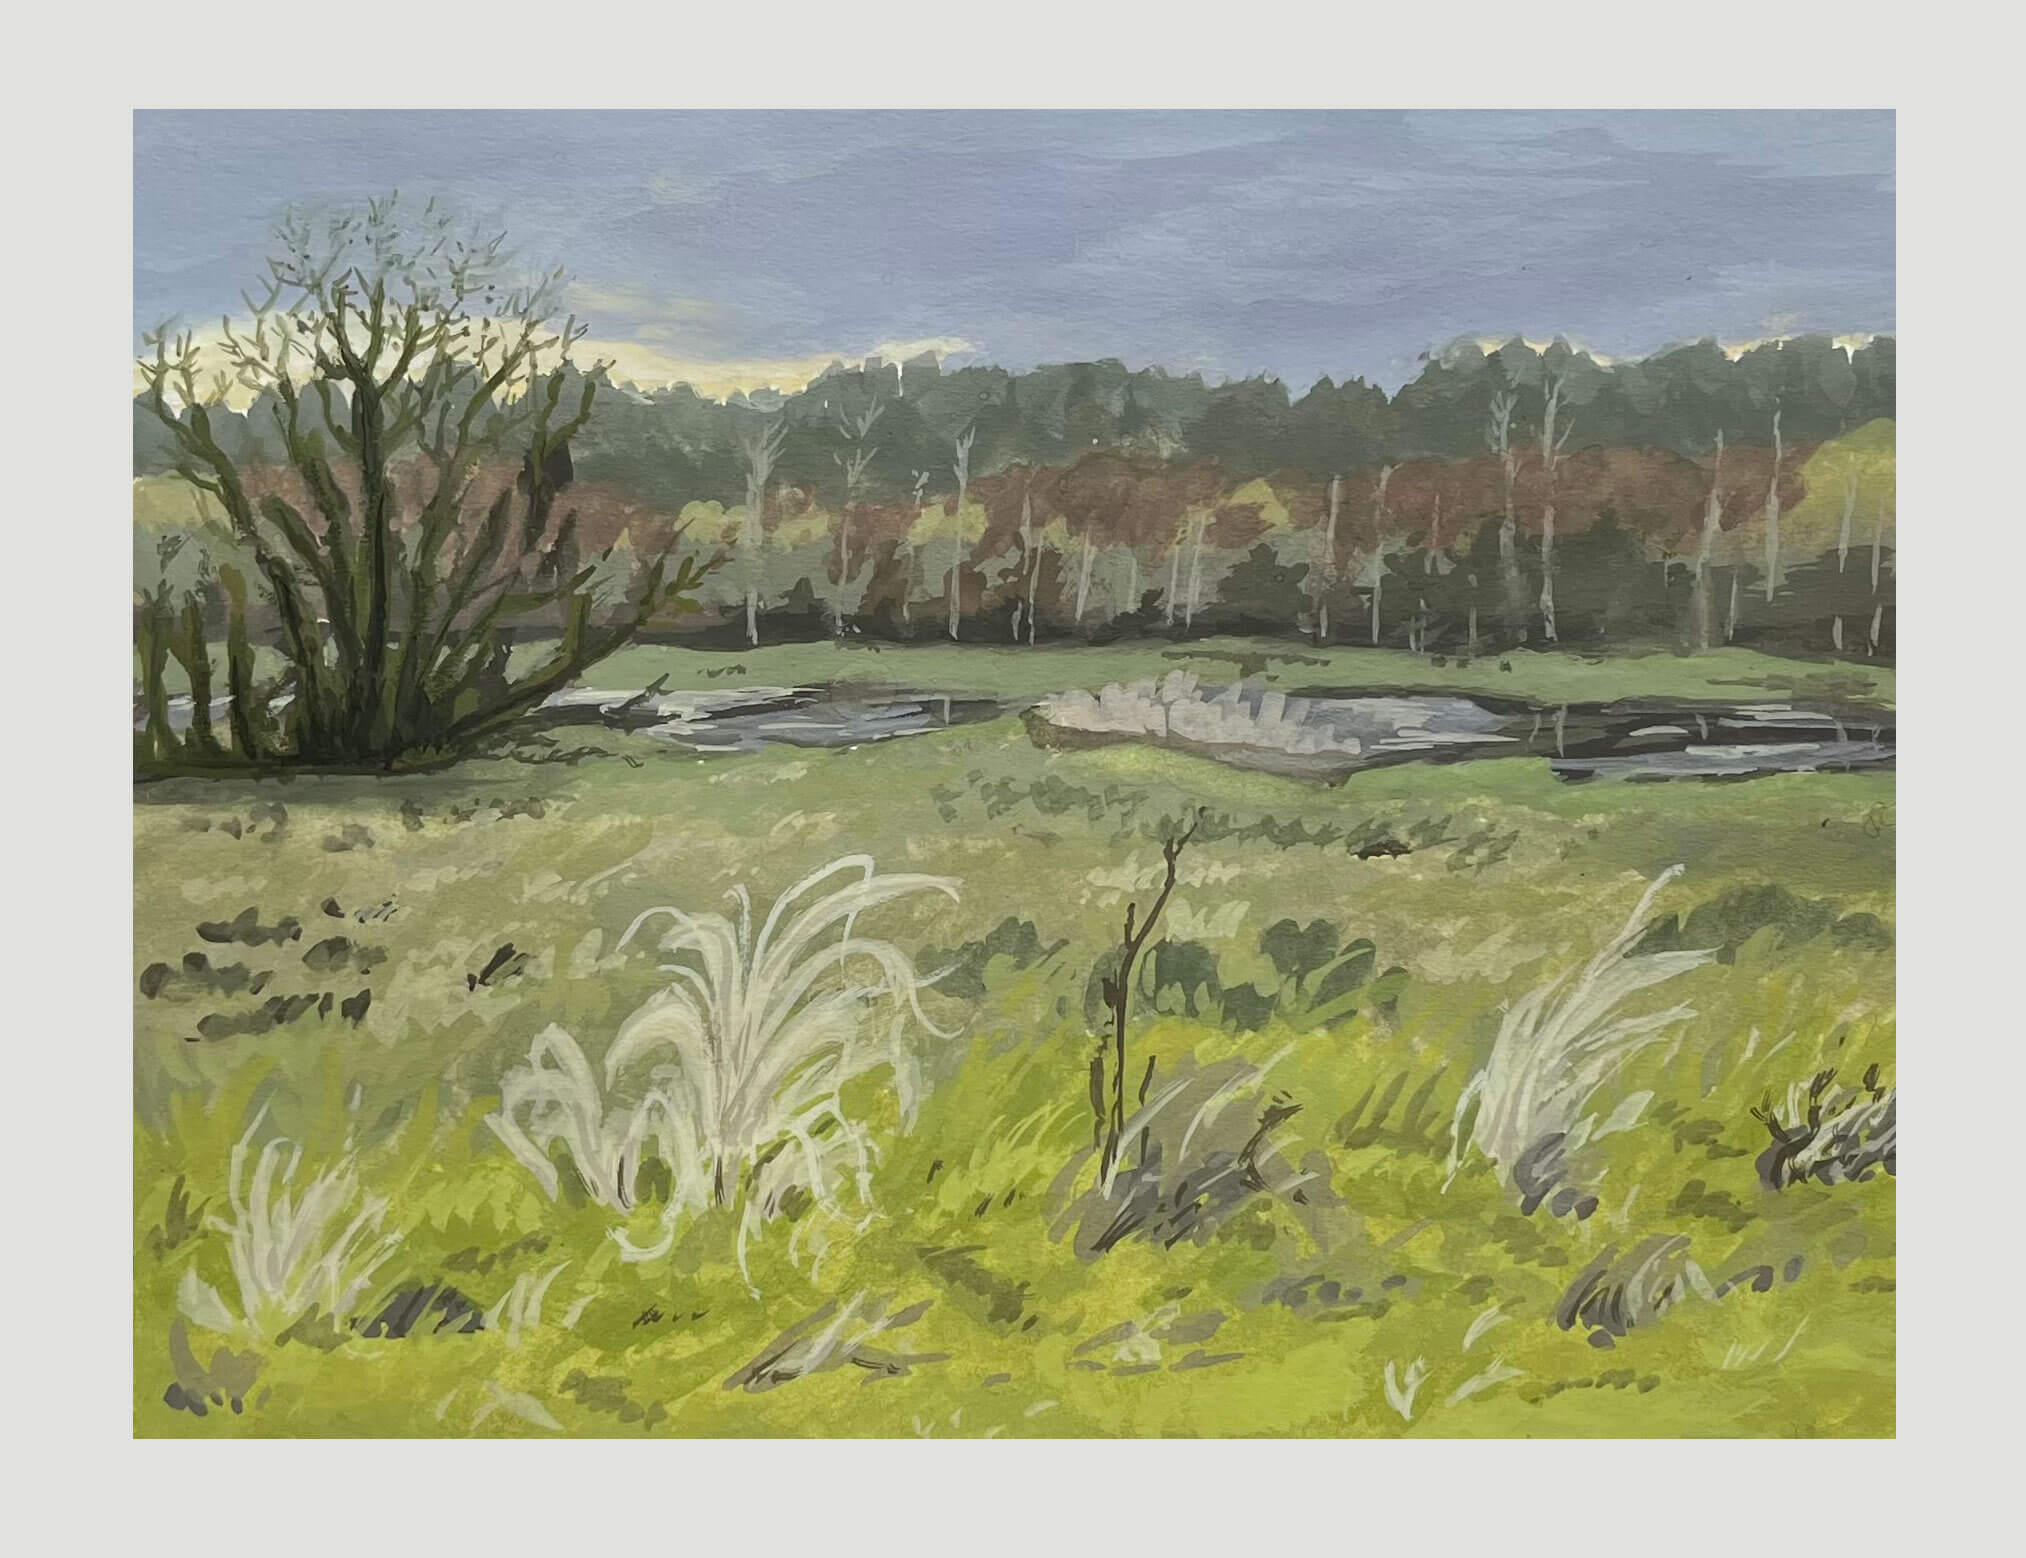 Painting of a meadow area near a body of water.